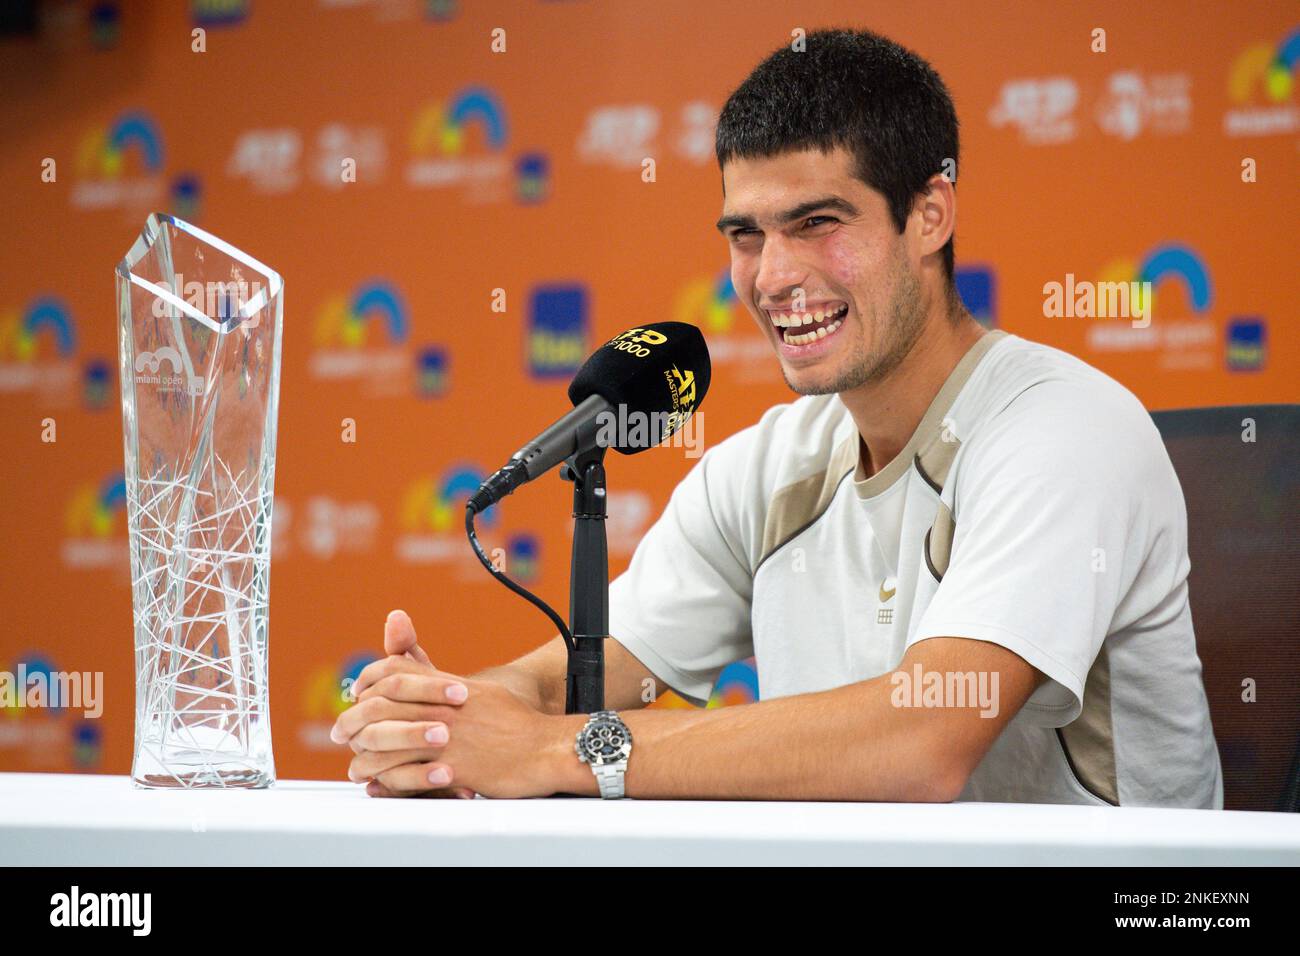 Carlos Alcaraz Garfia of Spain speaks to the media during a press conference during the Miami